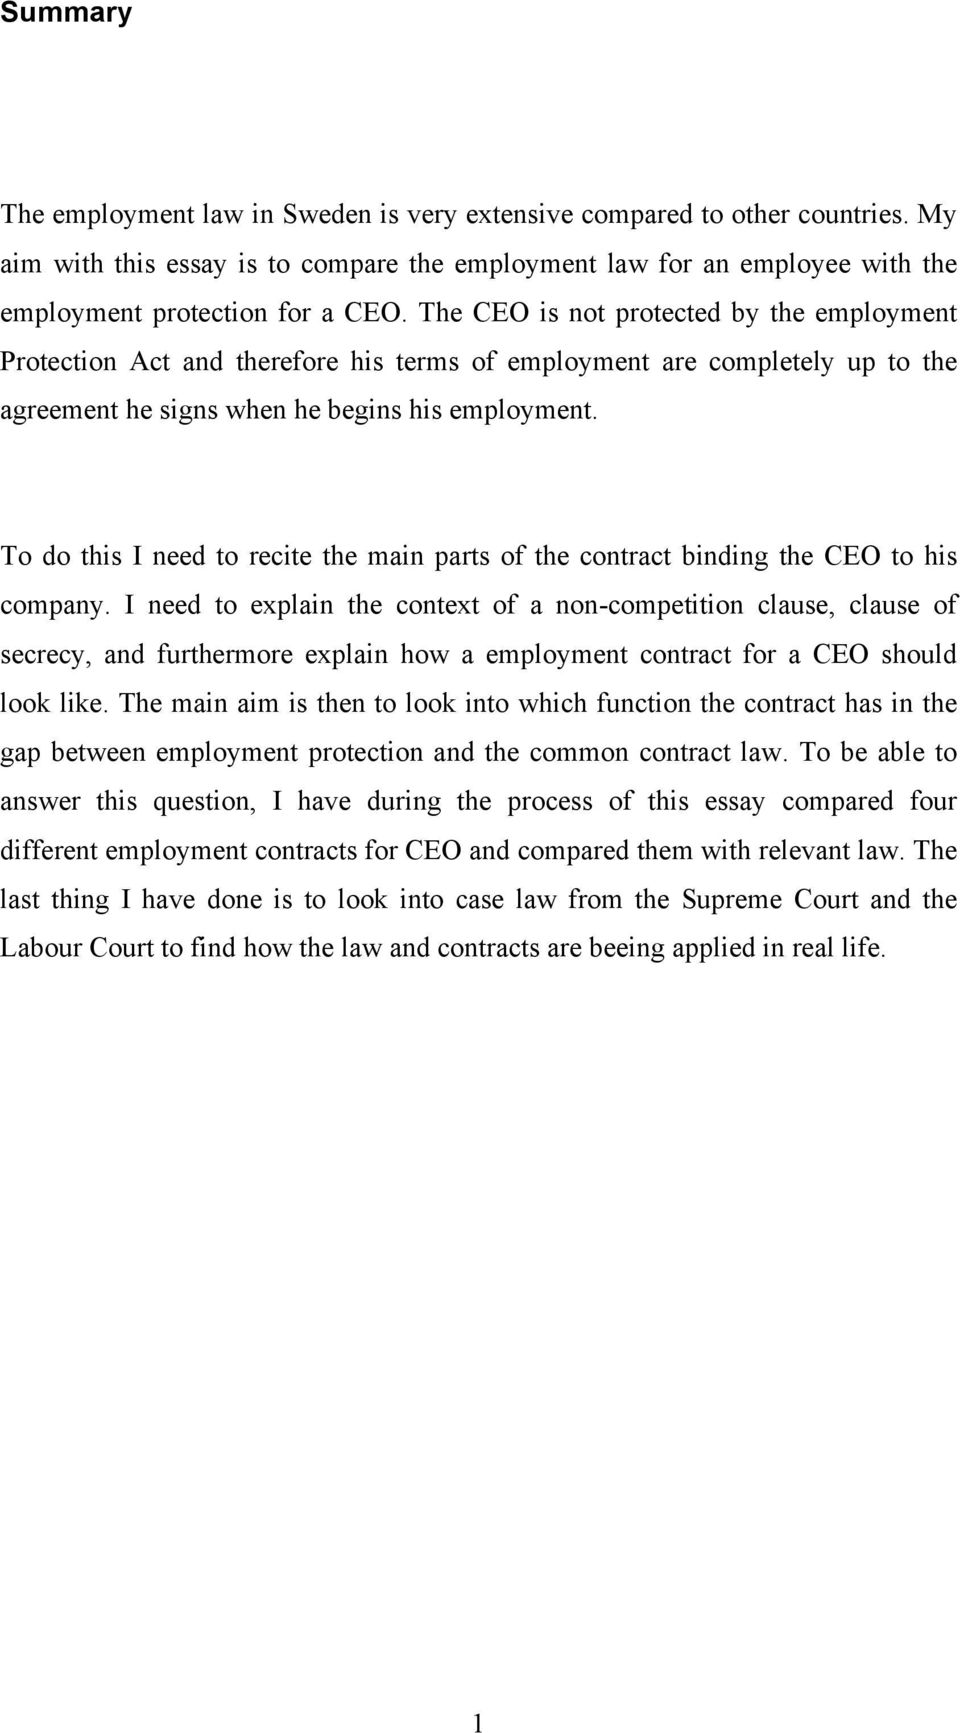 To do this I need to recite the main parts of the contract binding the CEO to his company.